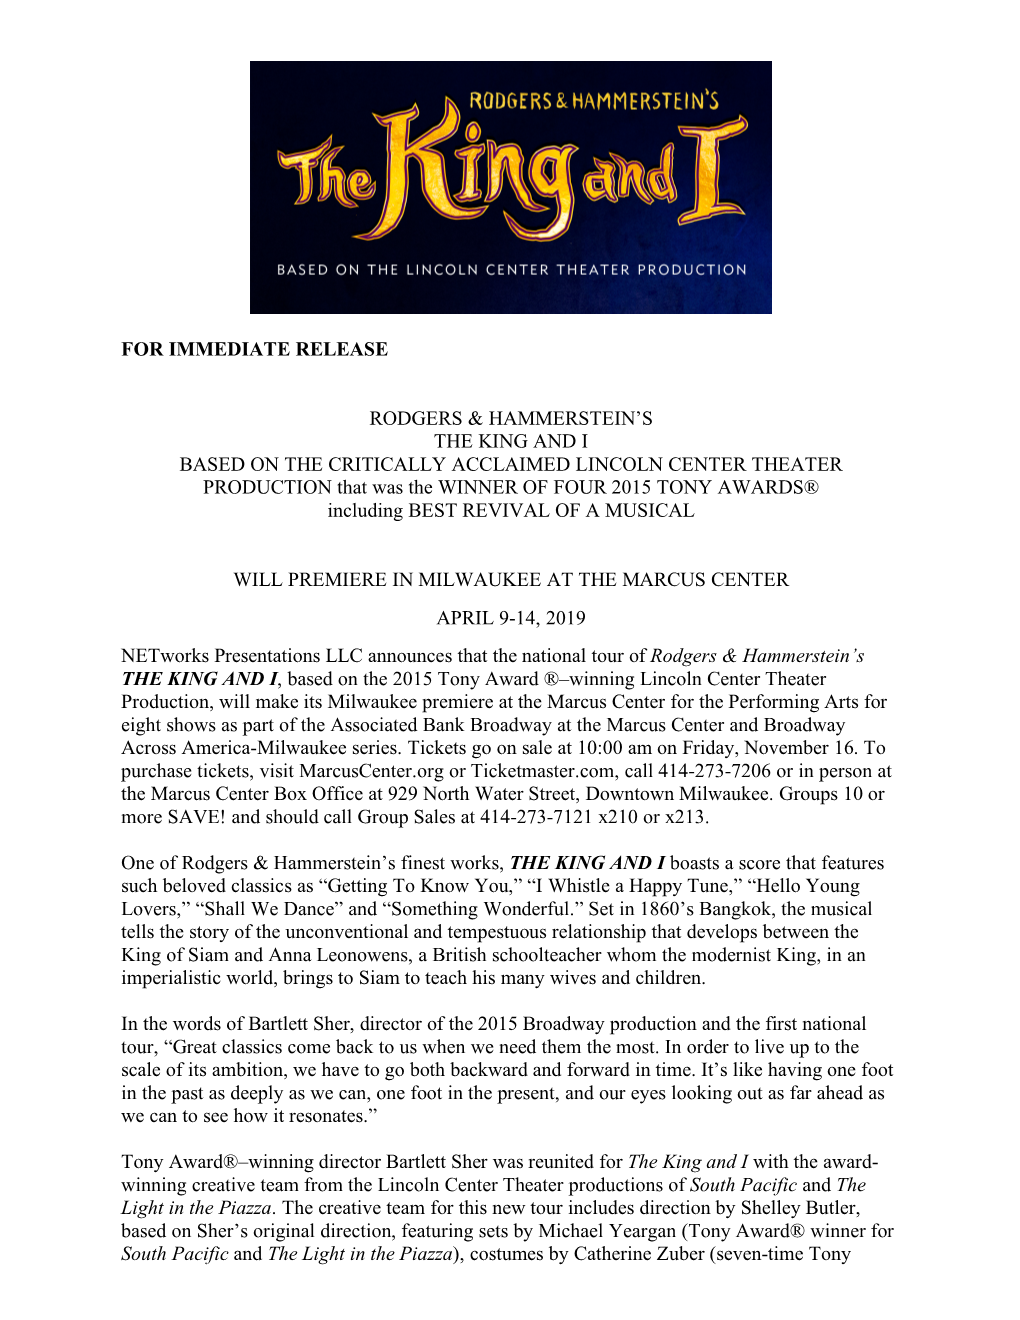 For Immediate Release Rodgers & Hammerstein's the King and I Based on the Critically Acclaimed Lincoln Center Theater Prod